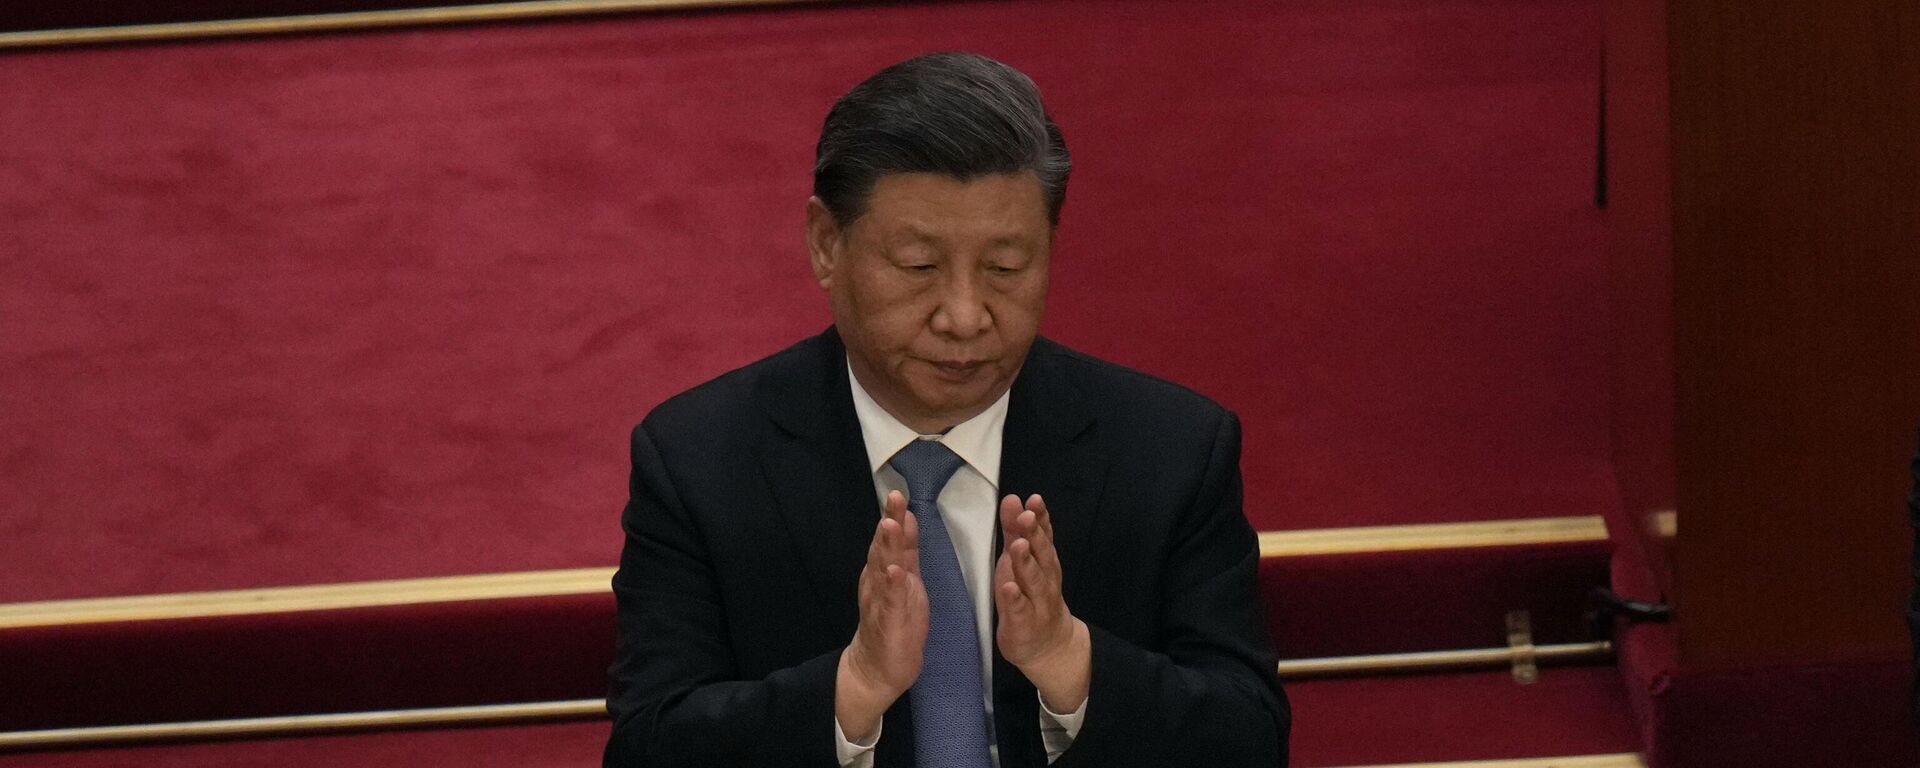 Chinese President Xi Jinping applauds during the opening session of the Chinese People's Political Consultative Congress (CPPCC) at the Great Hall of the People in Beijing, Saturday, March 4, 2023. (AP Photo/Andy Wong) - Sputnik International, 1920, 10.03.2023